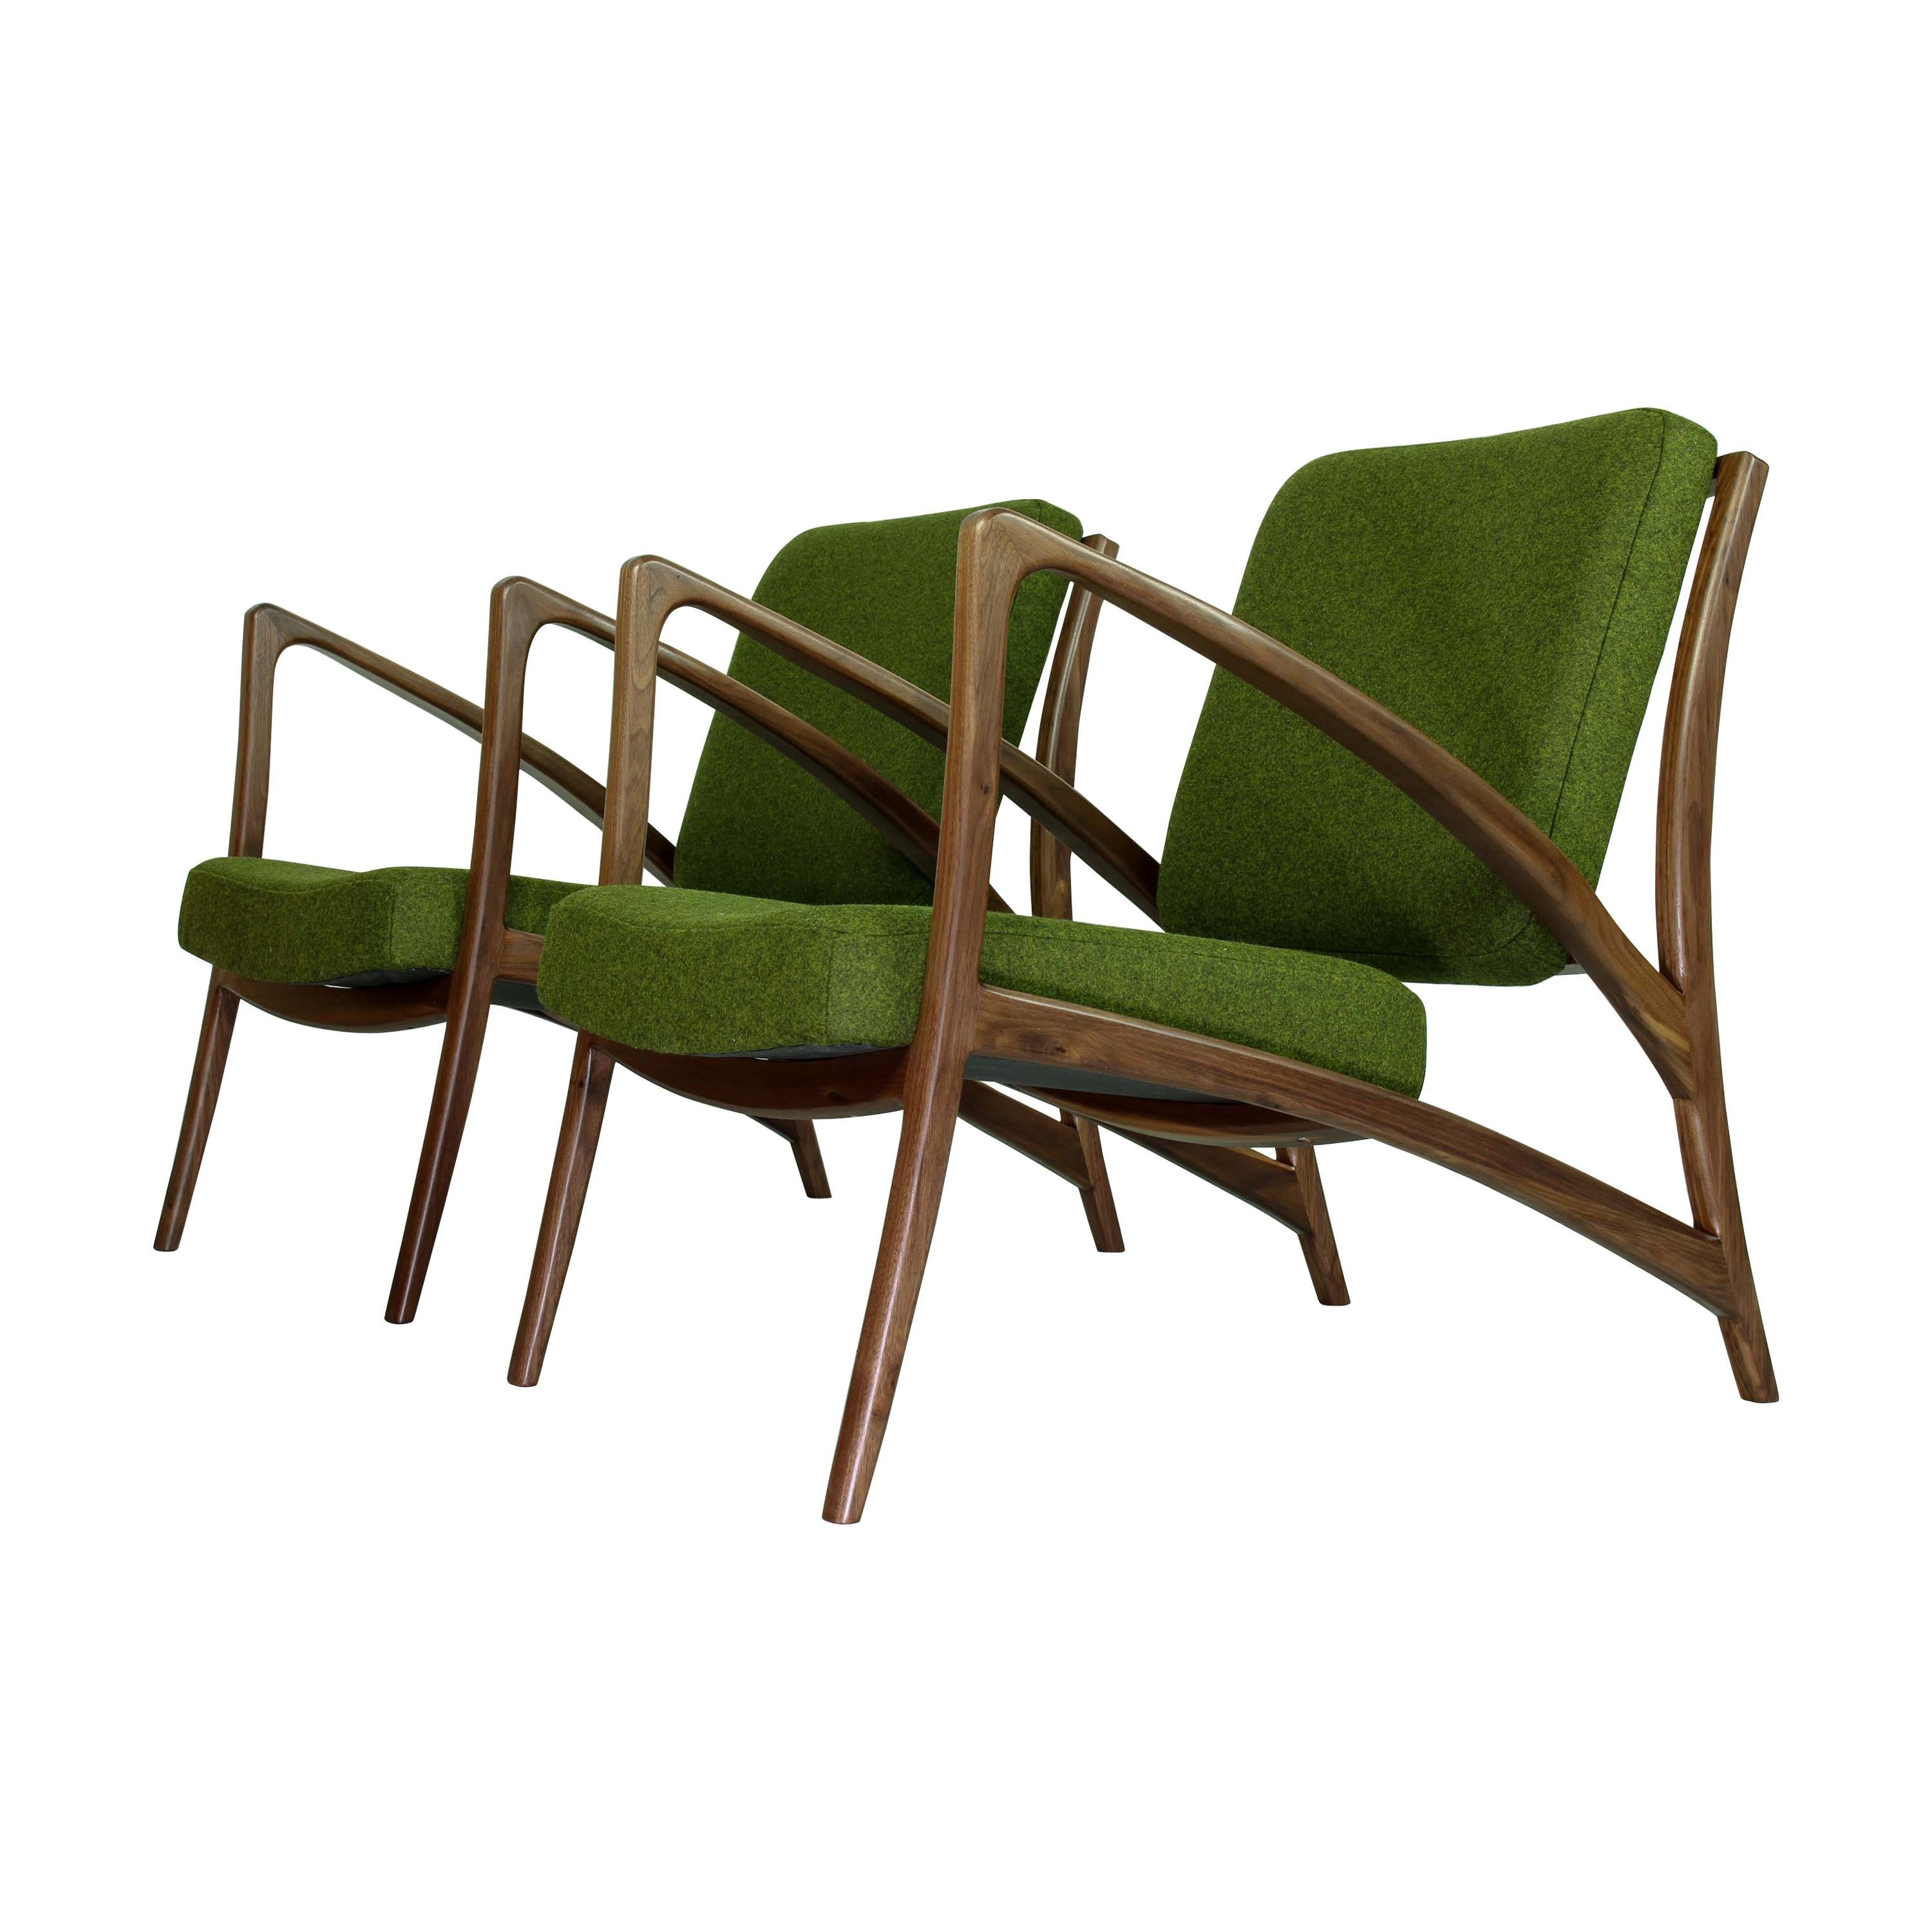 Stunning Curved Sculptural Lounge Chairs Floating Dutch Design